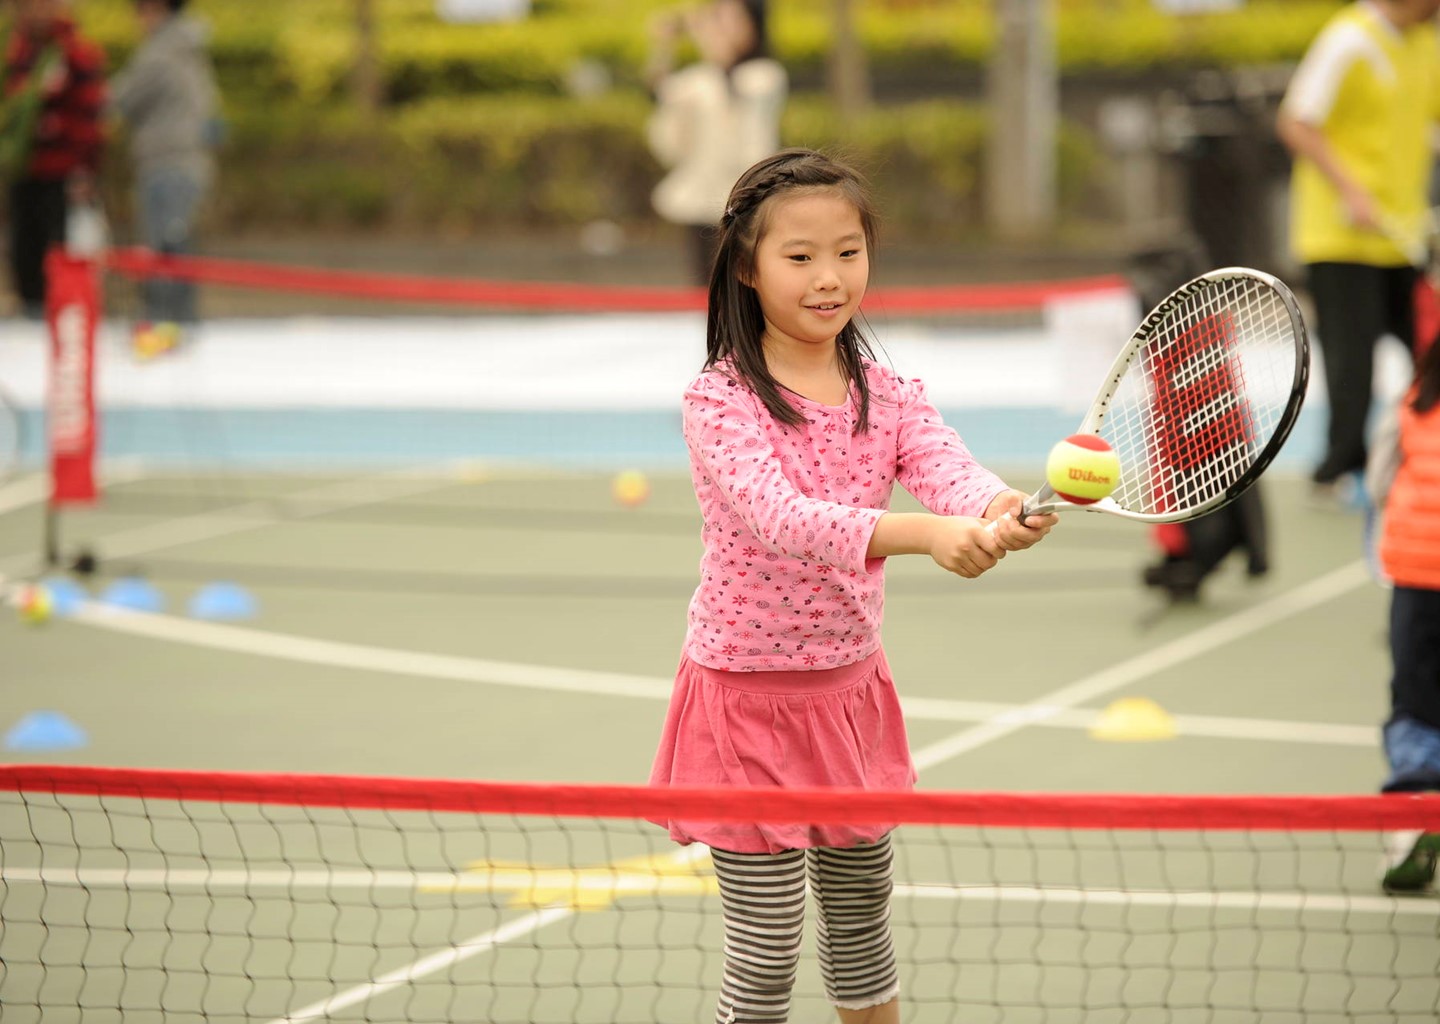 Lady Plays Tennis - Sometimes The Only Way, To Stay Happy Is Playing  Tennis, Tennis Player - FridayStuff